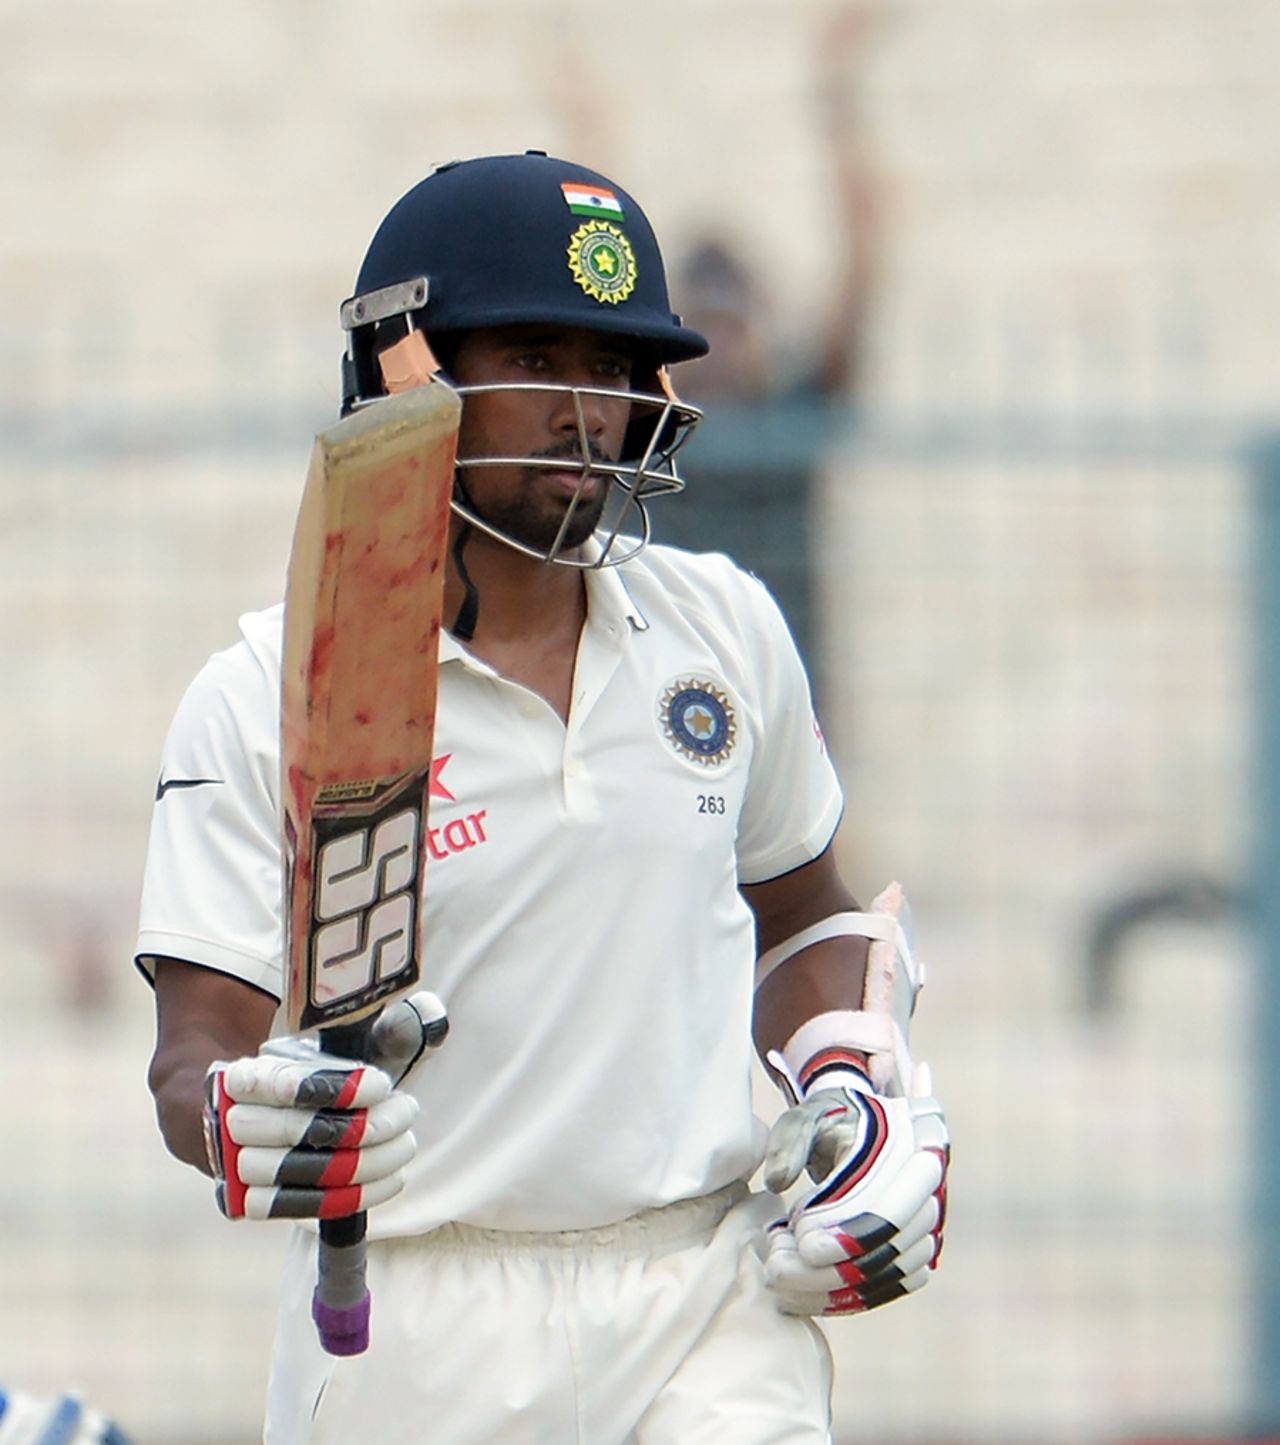 Wriddhiman Saha raises his bat after scoring his second fifty of the match, India v New Zealand, 2nd Test, Kolkata, 4th day, October 3, 2016